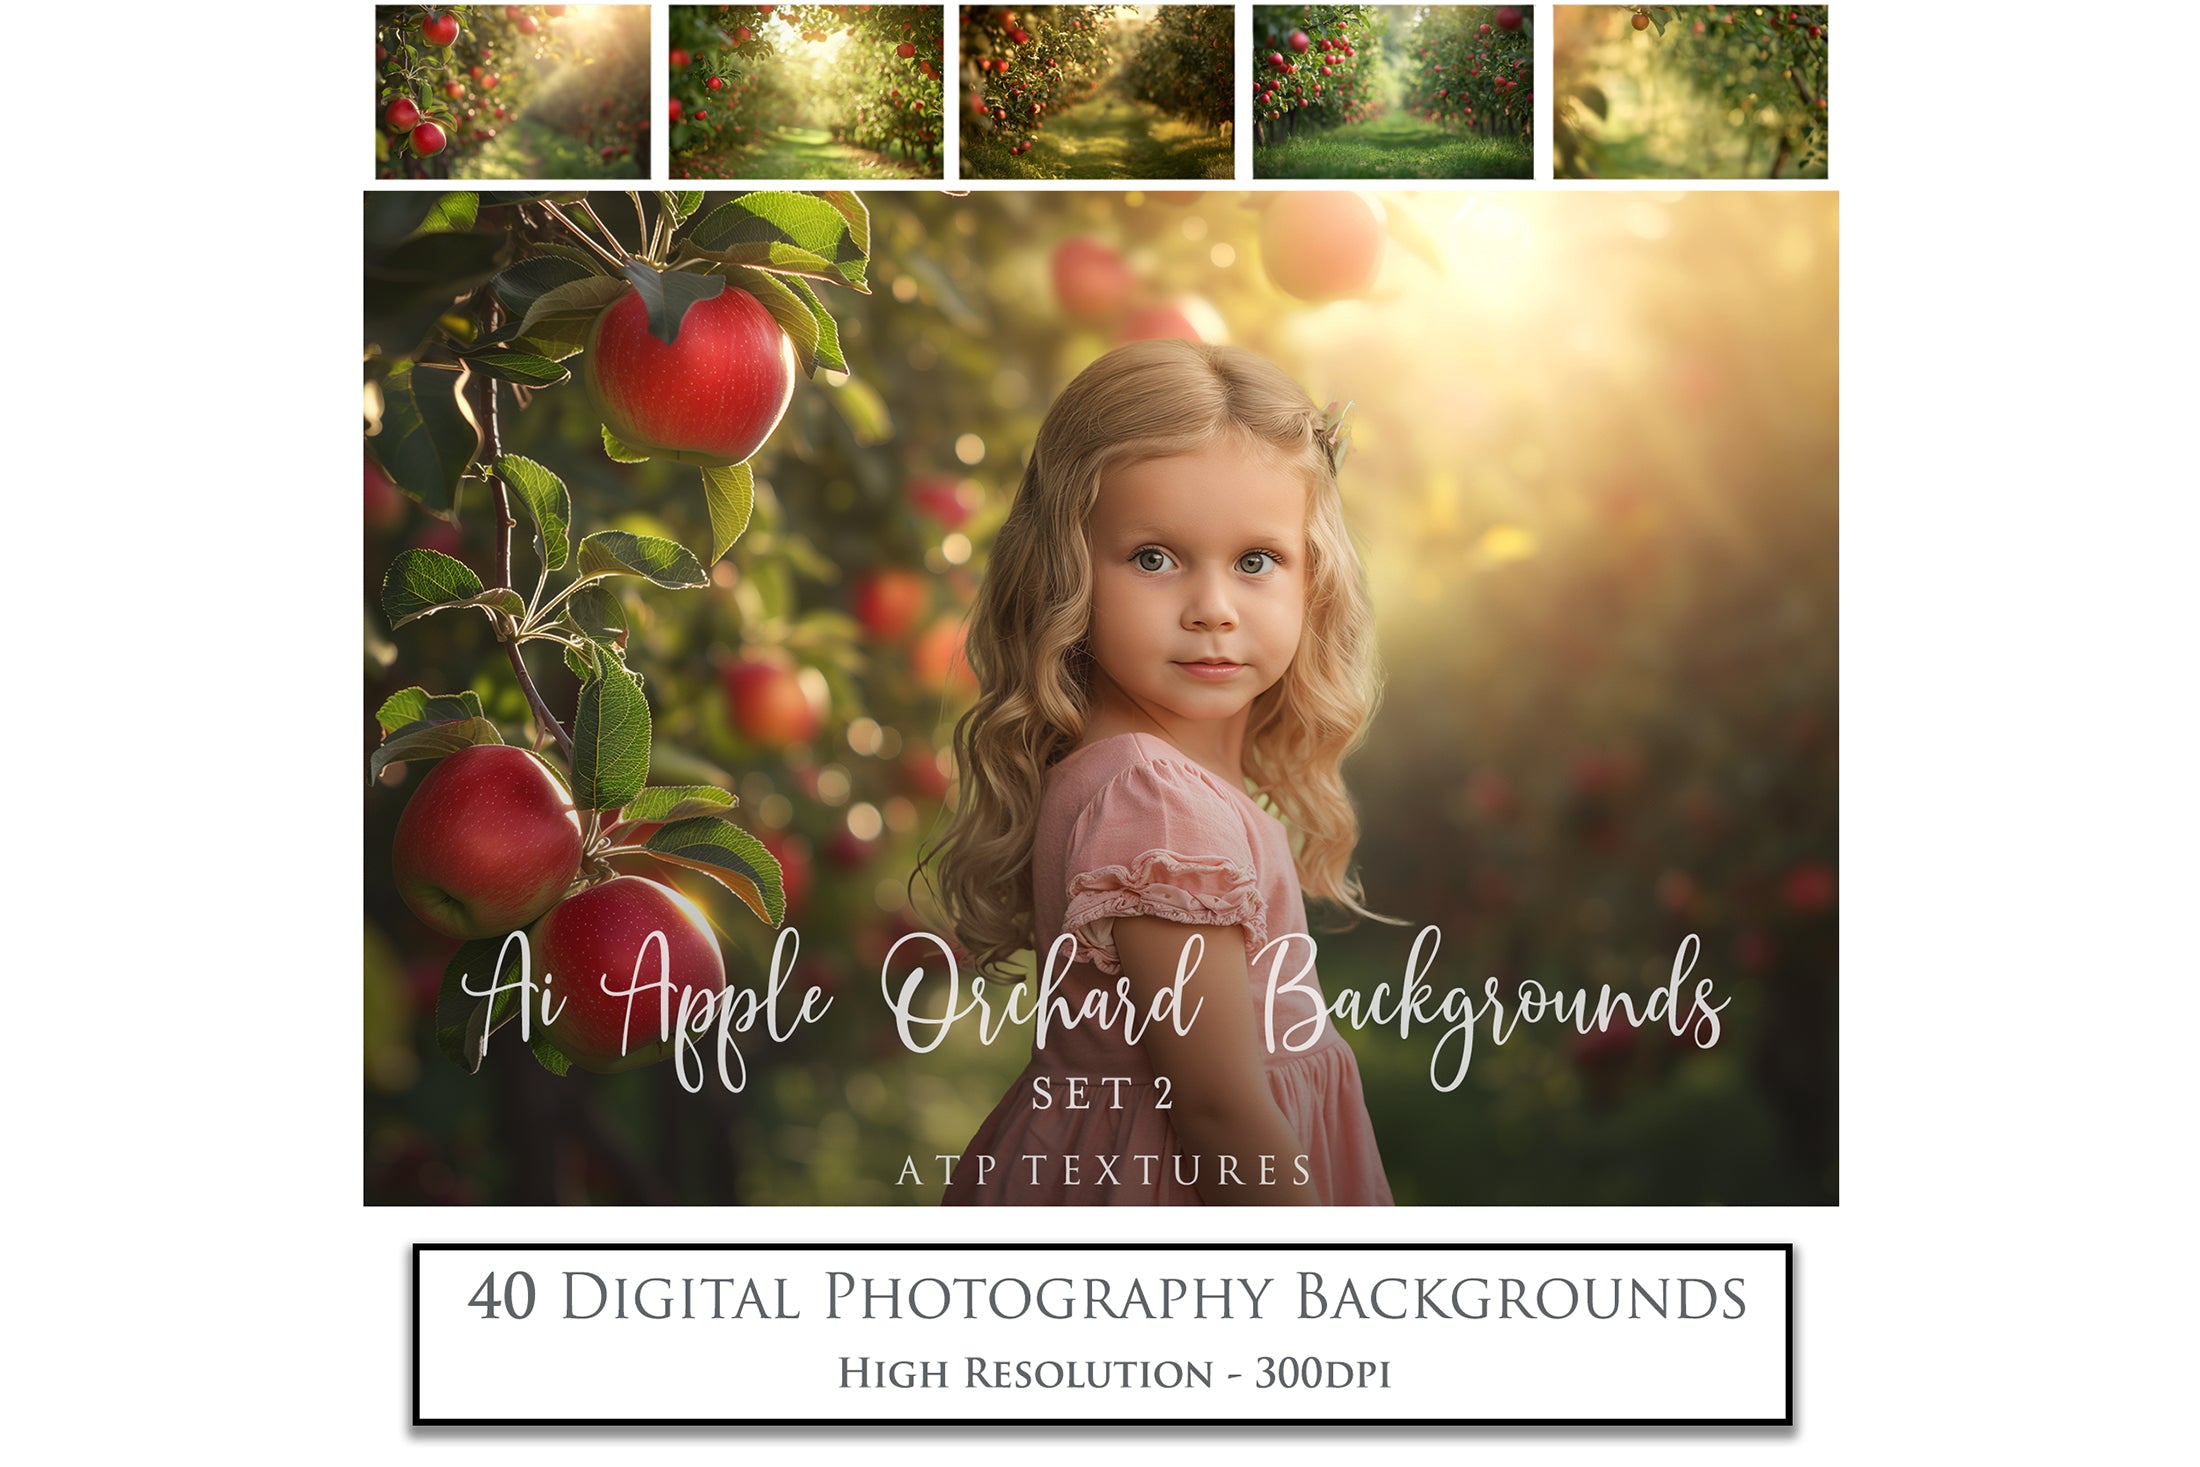 Apple Orchard Digital Background for Photographers. Fine Art Photo Backdrop. Add to your images for a dramatic sky effect. Each Digital file is 300dpi. These are in Jpeg format and high resolution. Find more at ATP Textures store.